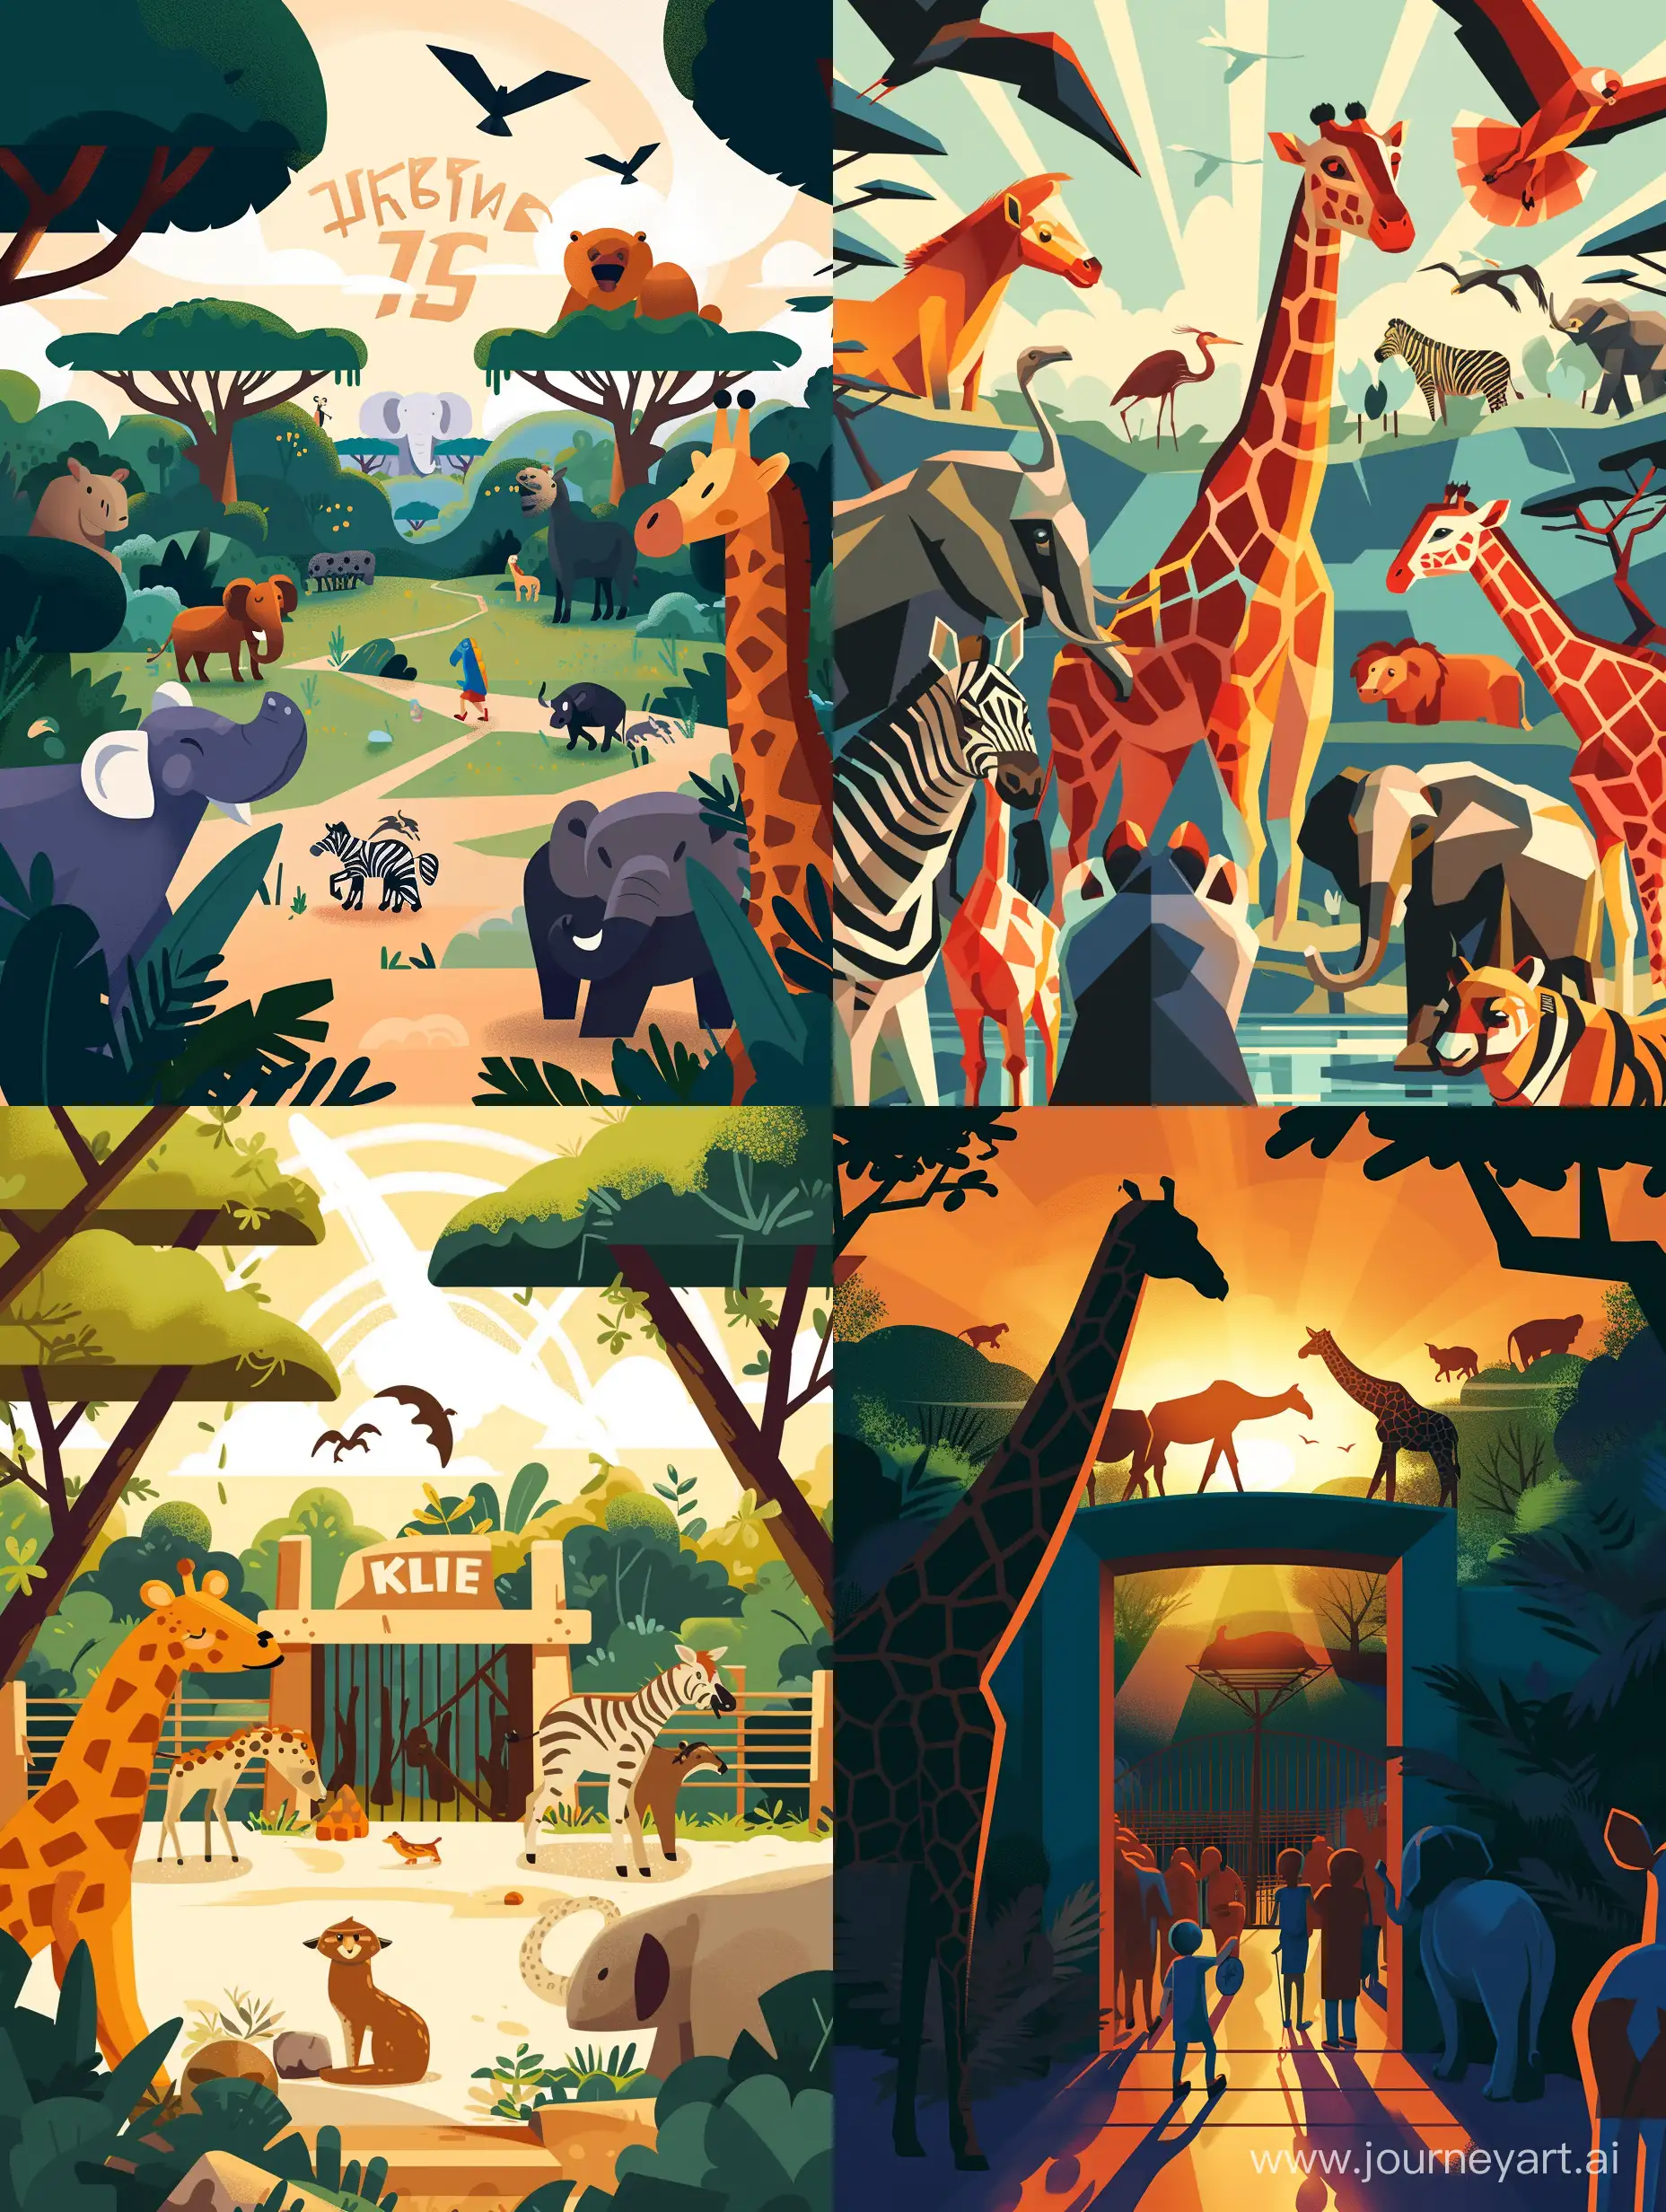 Vivid-Flat-Illustration-of-a-Zoo-with-Striking-Light-and-Shadow-Contrasts